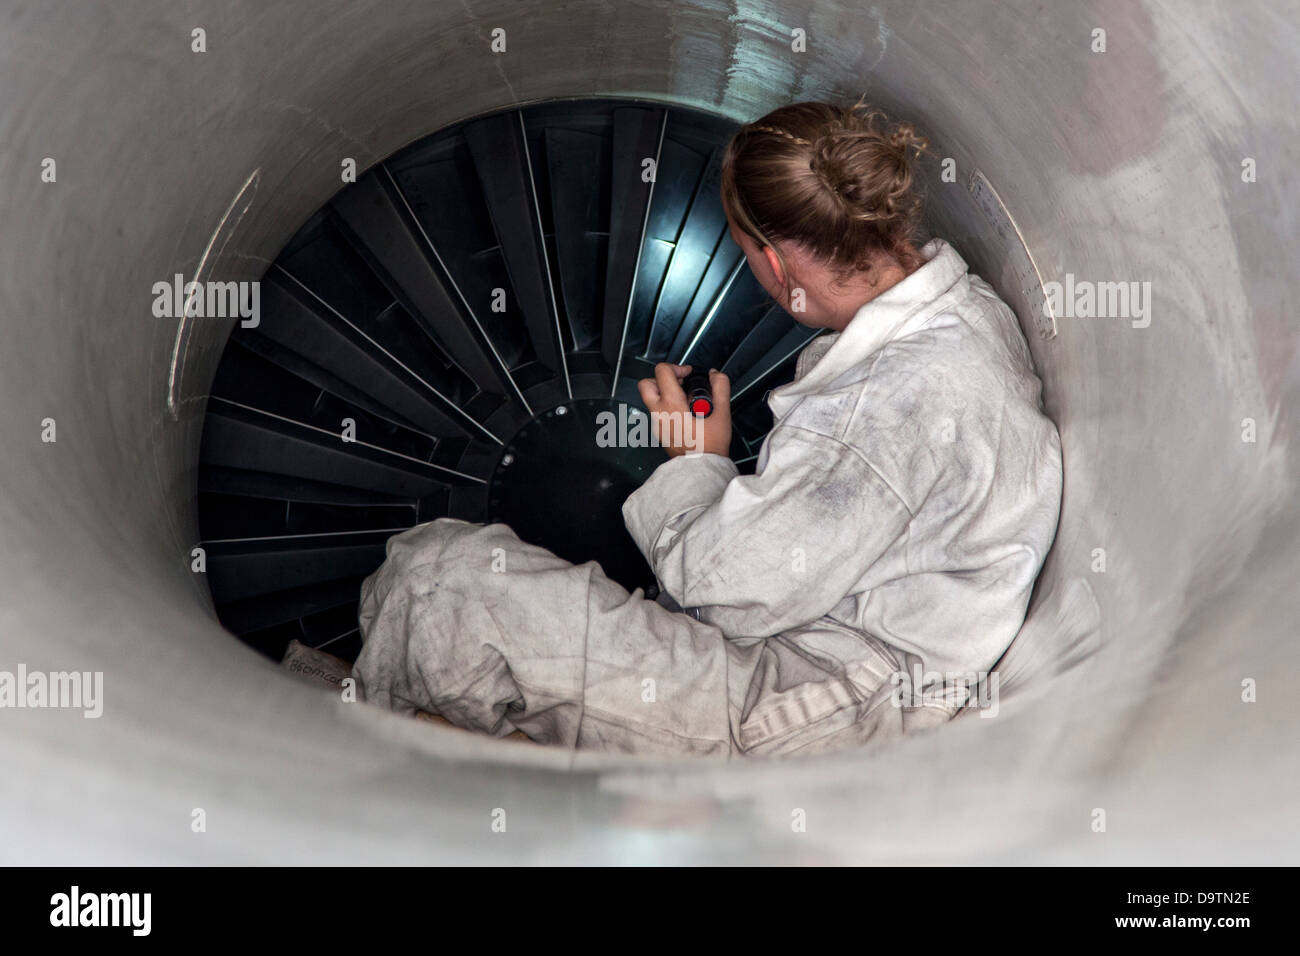 Senior Airman Kristen Lee, from the 140th Maintenance Squadron, Colorado Air National Guard, examines the intake of an F-16 Fighting Falcon after a flight in the skies over Jordan during the Eager Lion exercise. Eager Lion is a U.S. Central Command-direct Stock Photo